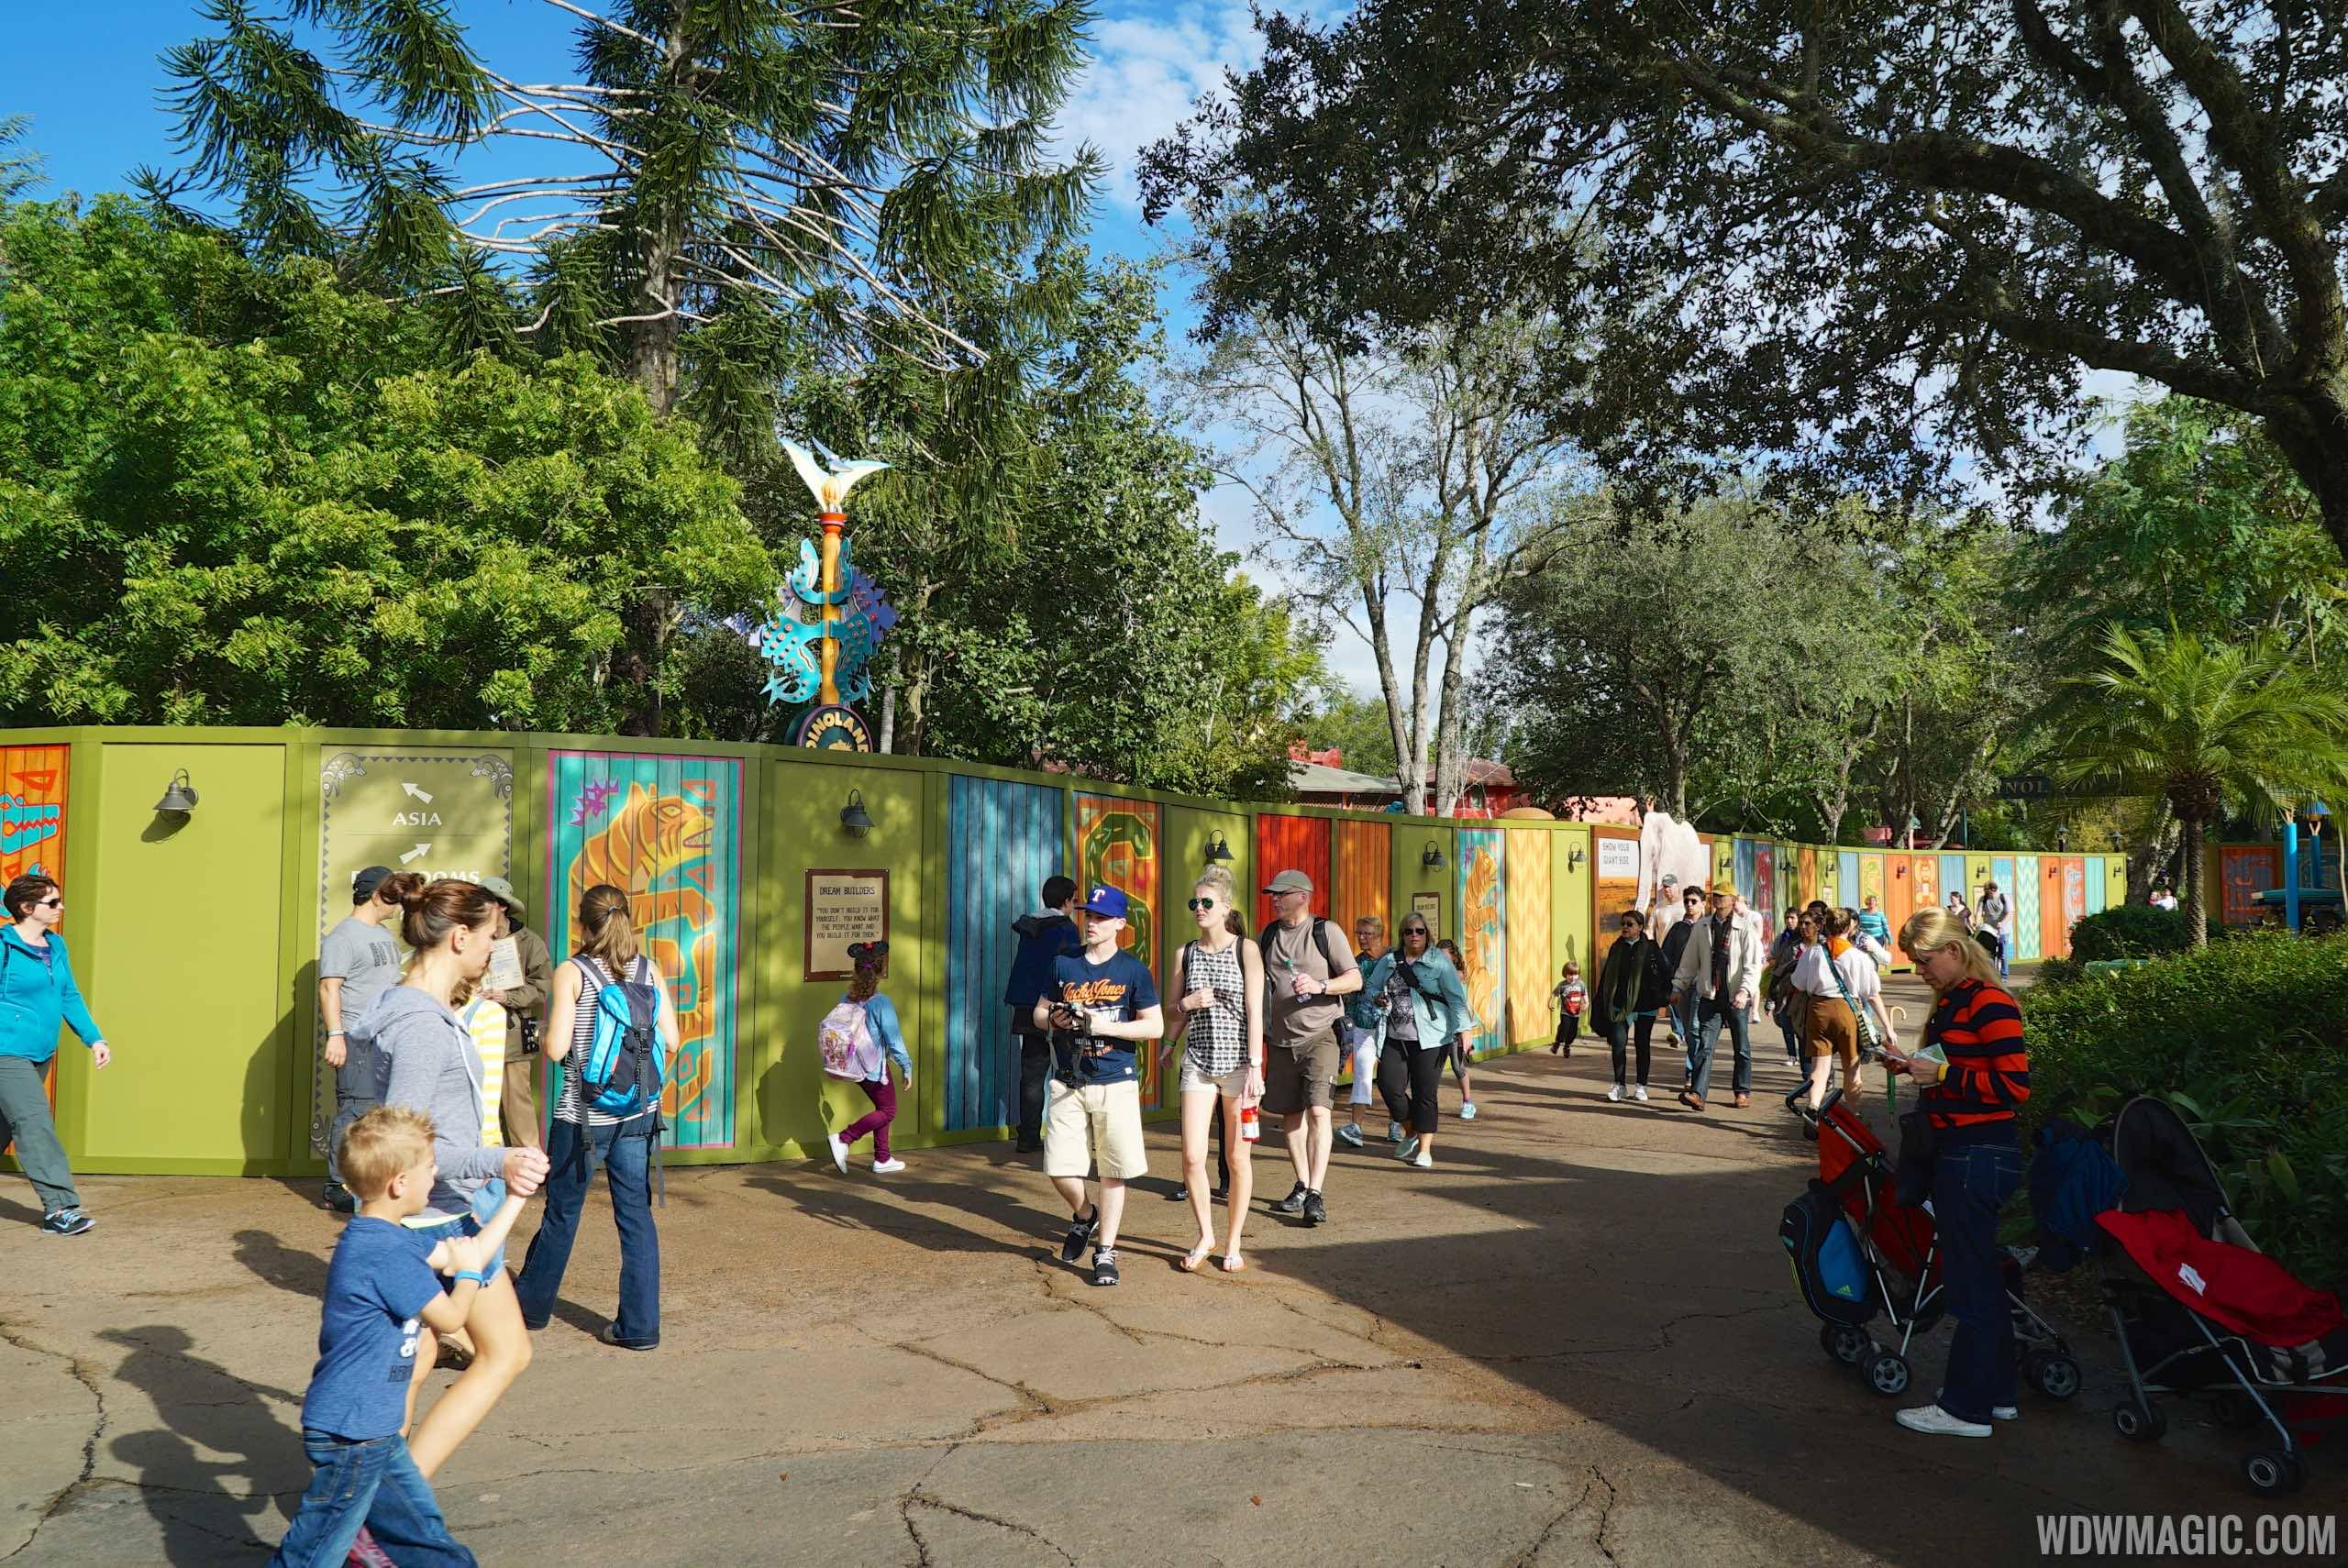 PHOTOS - More construction walls go up at Disney's Animal Kingdom on Discovery Island